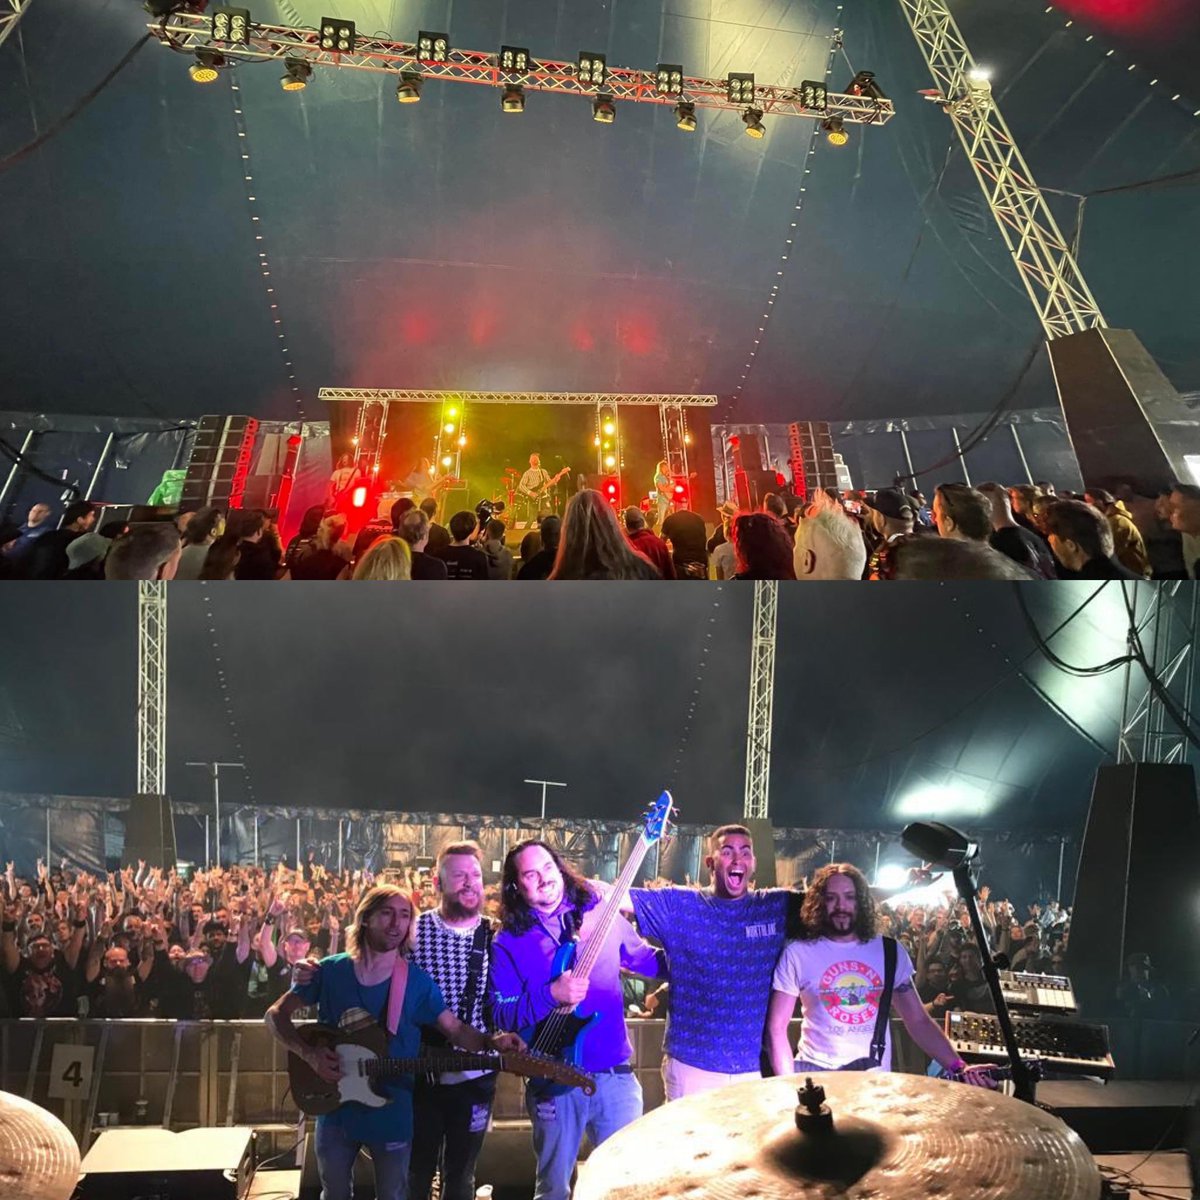 Thank you @DownloadFest ! It was a dream come true and an absolutely mind blowing honour to have been able to play DL2022 🖤 🔥😎 #downloadfestival #downloadfestival2022 #templesonmars #sleepwalkingintoextinction #thedogtoothstage #dreamcometrue